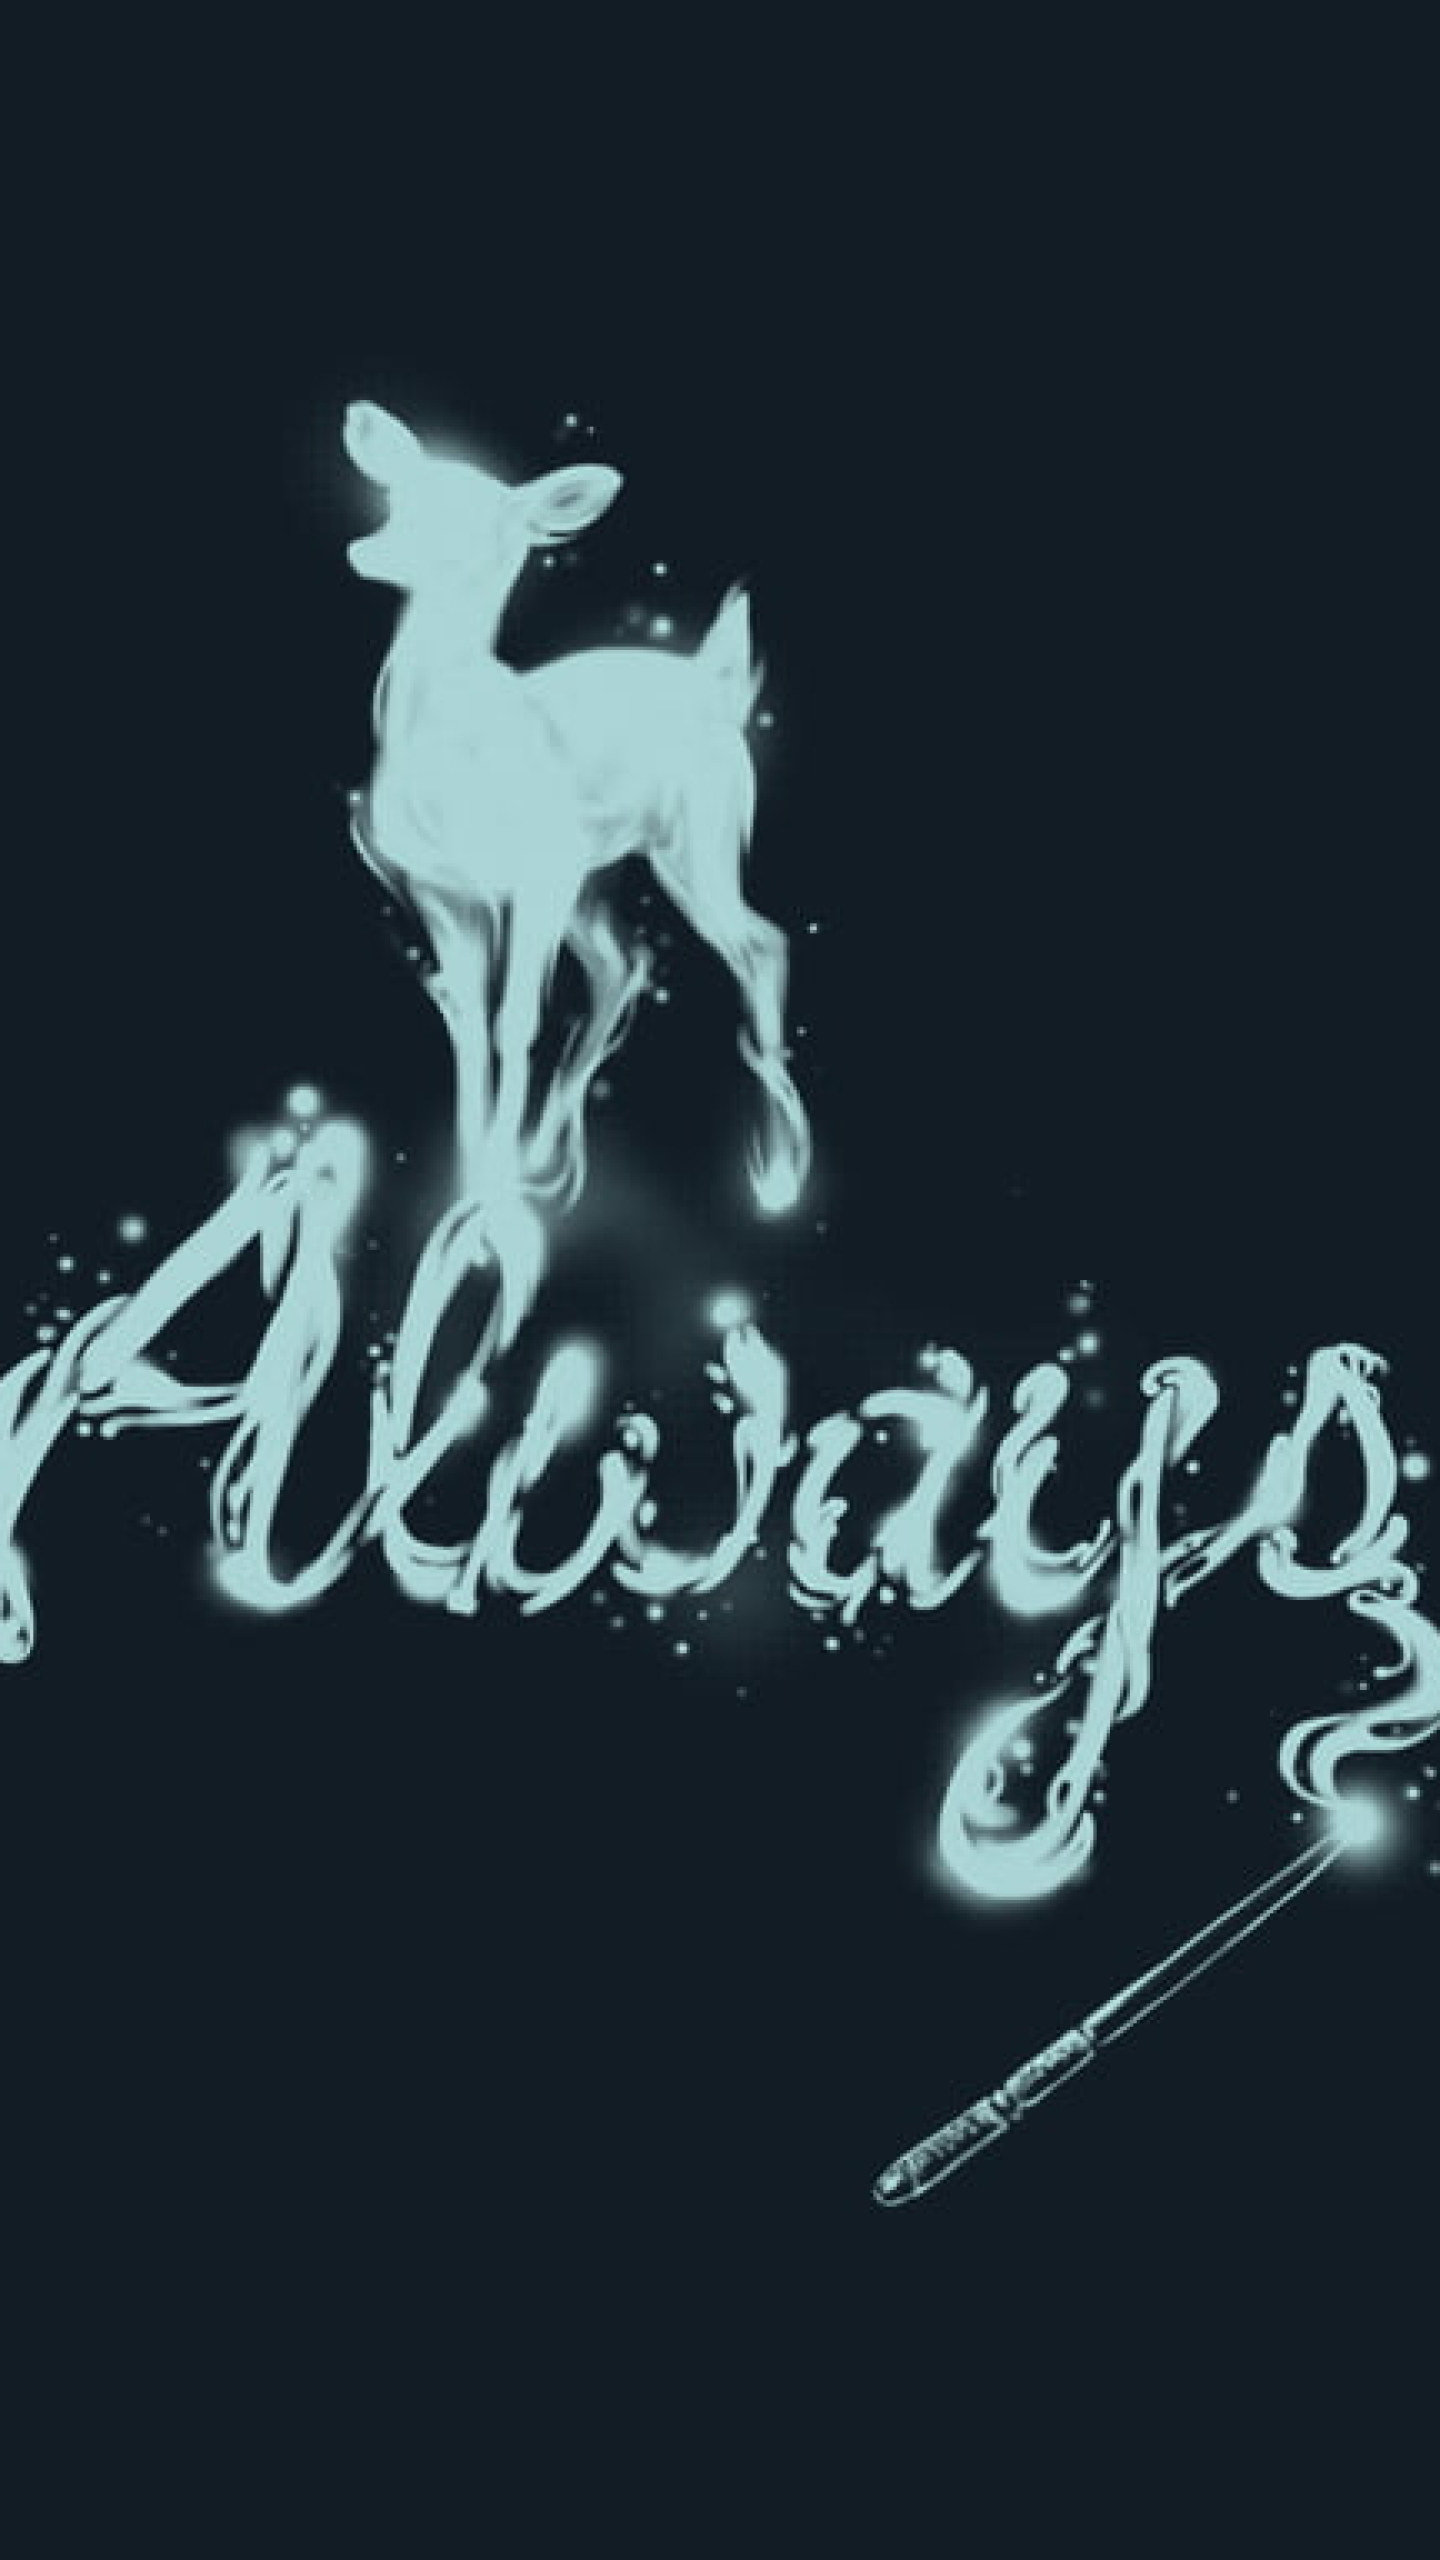 Always Text Wallpaper, Minimalism, Deer, Simple Background, Harry Potter • Wallpaper For You